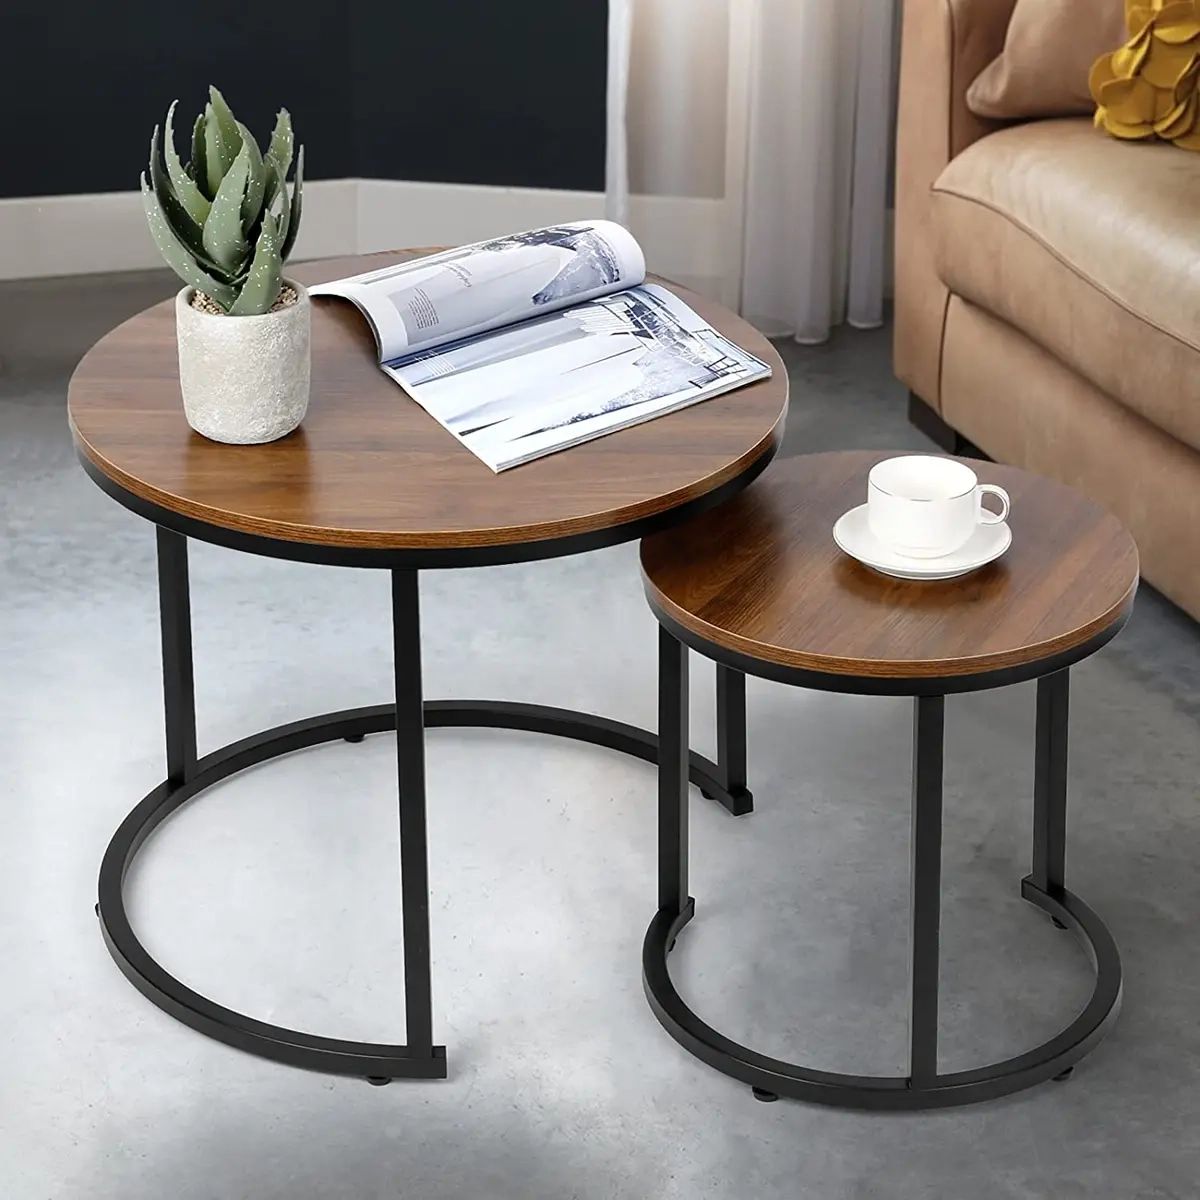 Modern Nesting Coffee Table Set Of 2 For Living Room Balcony Office, Round  Wood | Ebay Intended For Modern Nesting Coffee Tables (View 8 of 15)